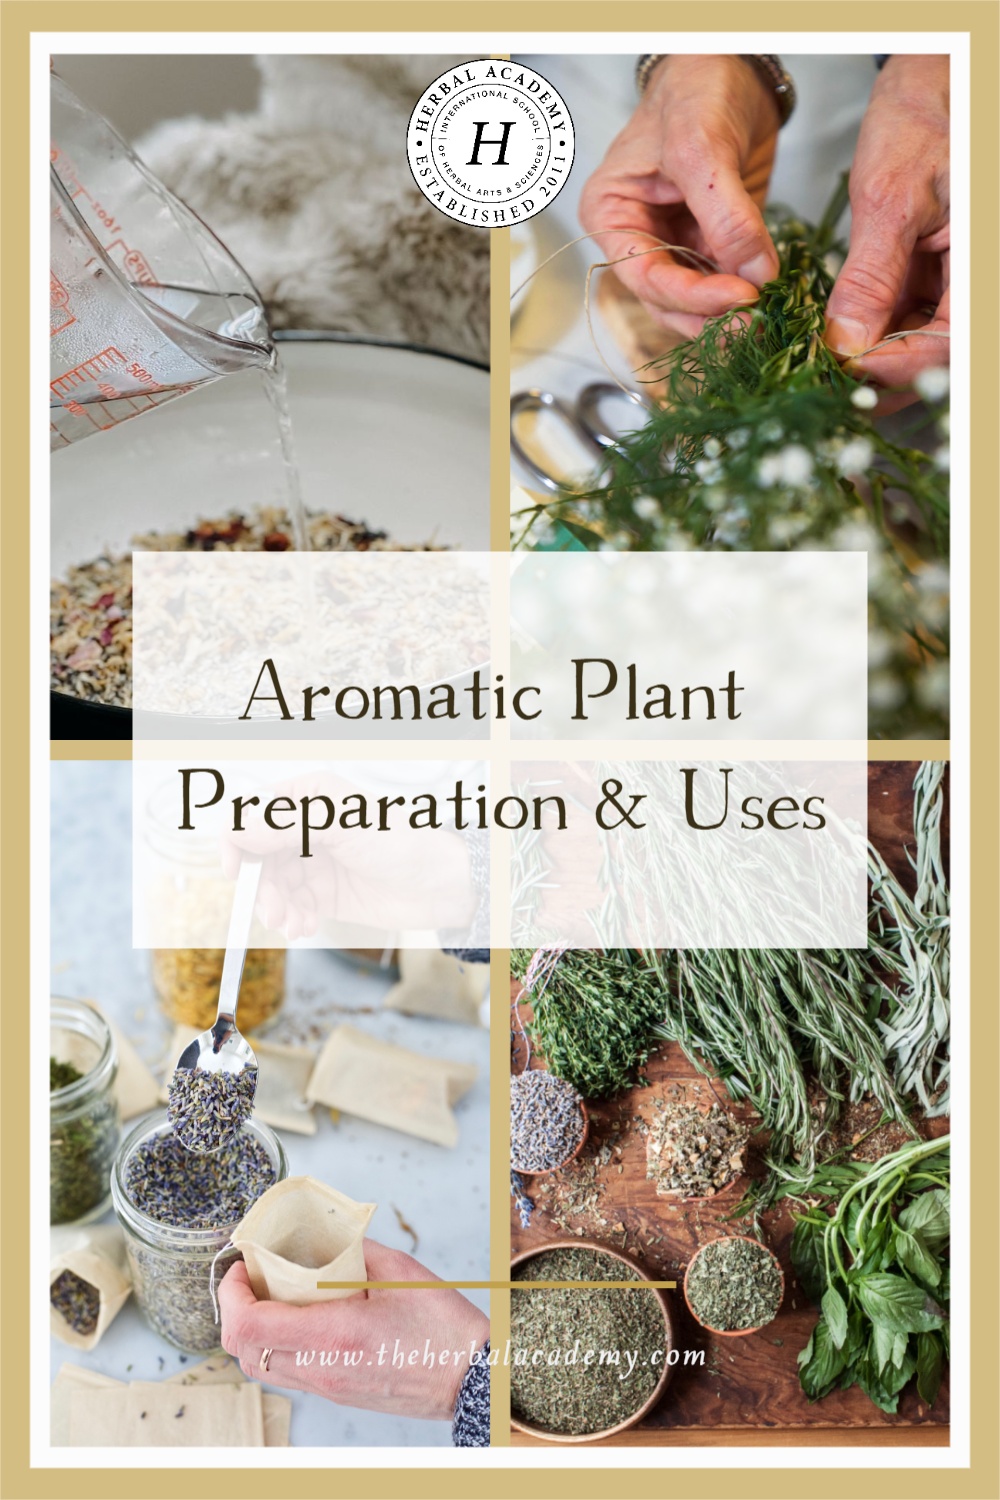 Aromatic Plant Preparation & Uses | Herbal Academy | Learn about aromatic plant preparation and uses in this excerpt taken from the book, "Botanicals with Benefits" by Kerry Hughes.